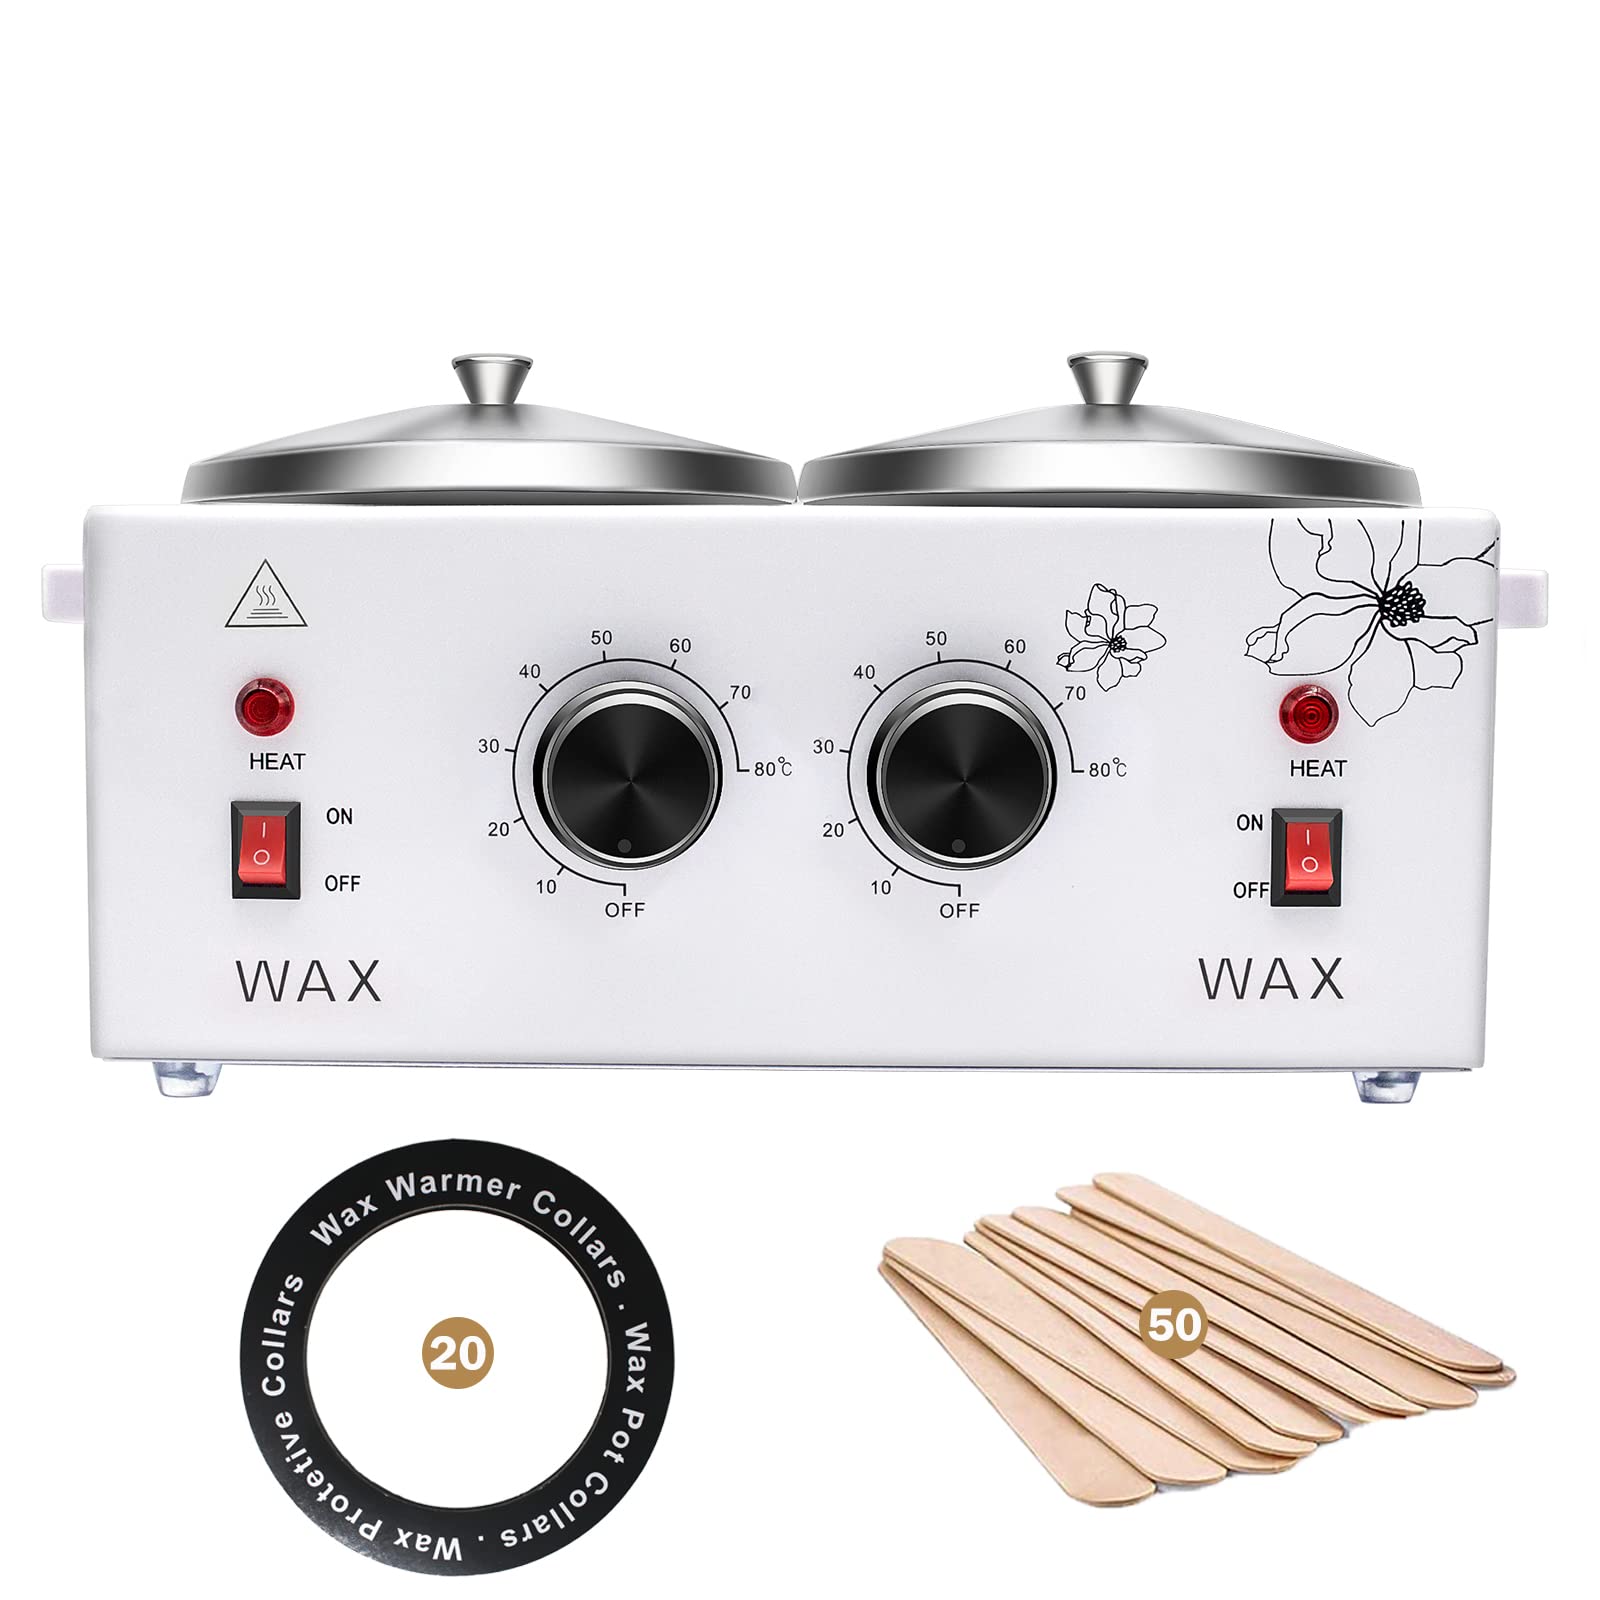 EXQST Wax Melter Heater, Double Pot Wax Heater Machine for Hair Removal,  Professional Waxing Kit Wax Warmer, Large Wax Pot for Spa Salon Beauty